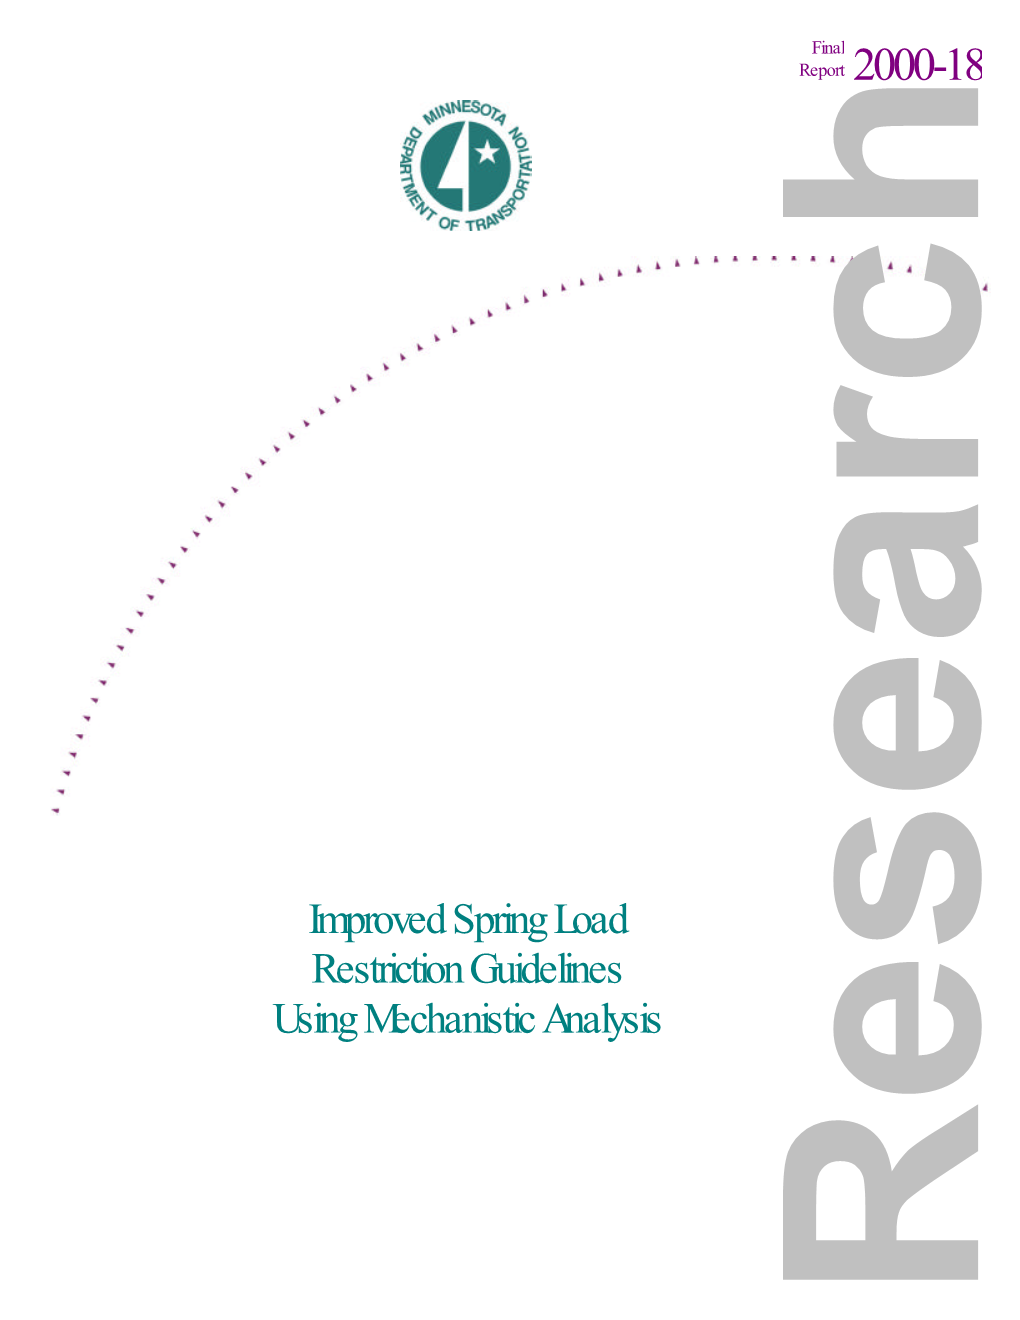 Improved Spring Load Restriction Guidelines Using Mechanistic Analysis